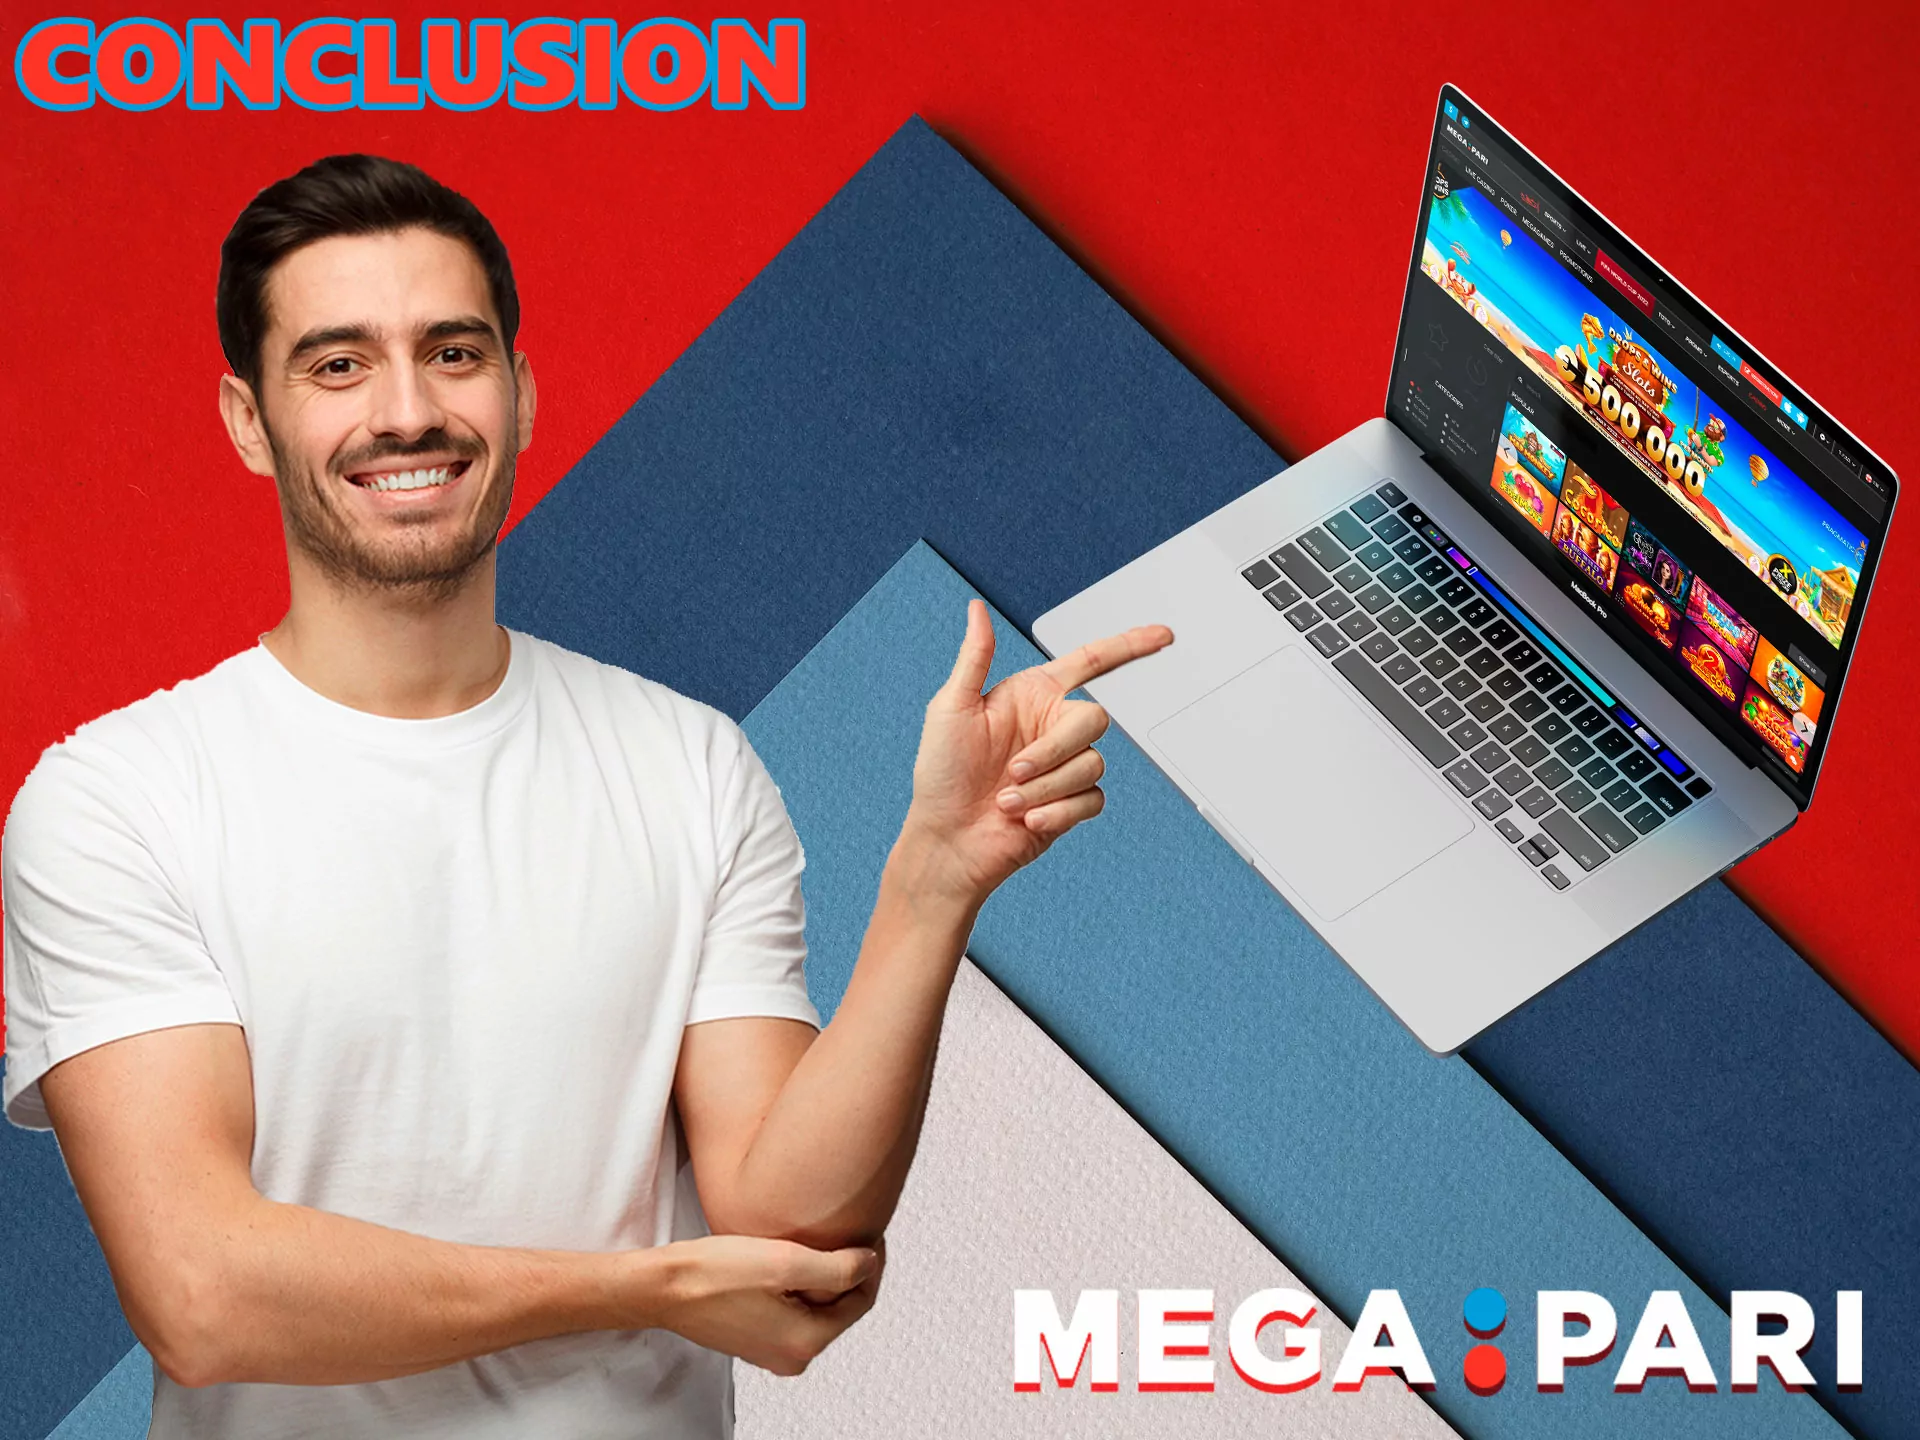 The residents of Bangladesh love Megapari, this is evidenced by the growing popularity of the site, so we can safely recommend this casino.